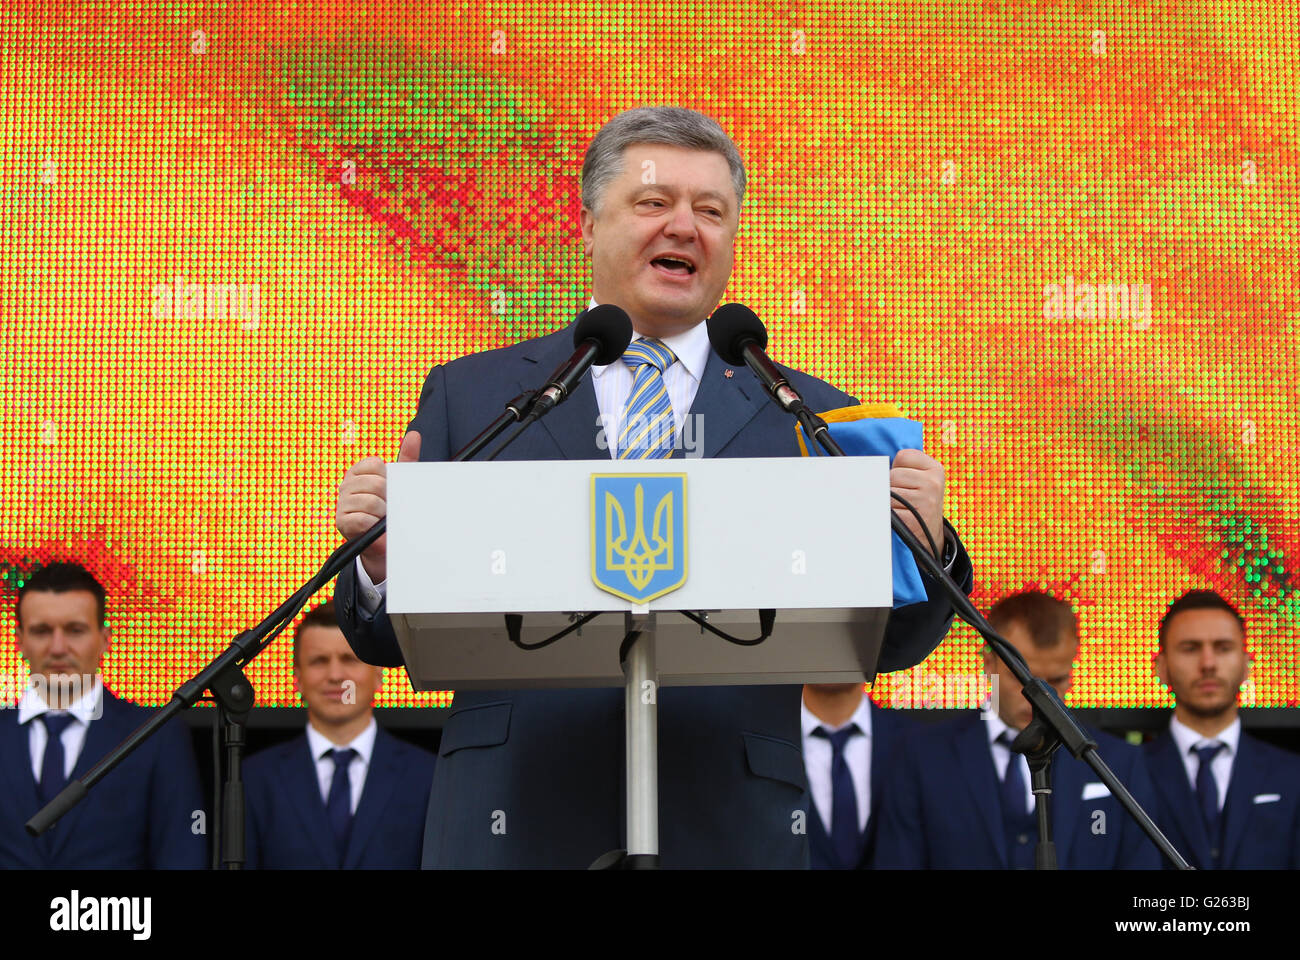 KYIV, UKRAINE - MAY 22,2016: Expressive speech by the President of Ukraine Petro Poroshenko at the ceremony of the Departure of the National Football Team of Ukraine for the European Championship 2016 Stock Photo